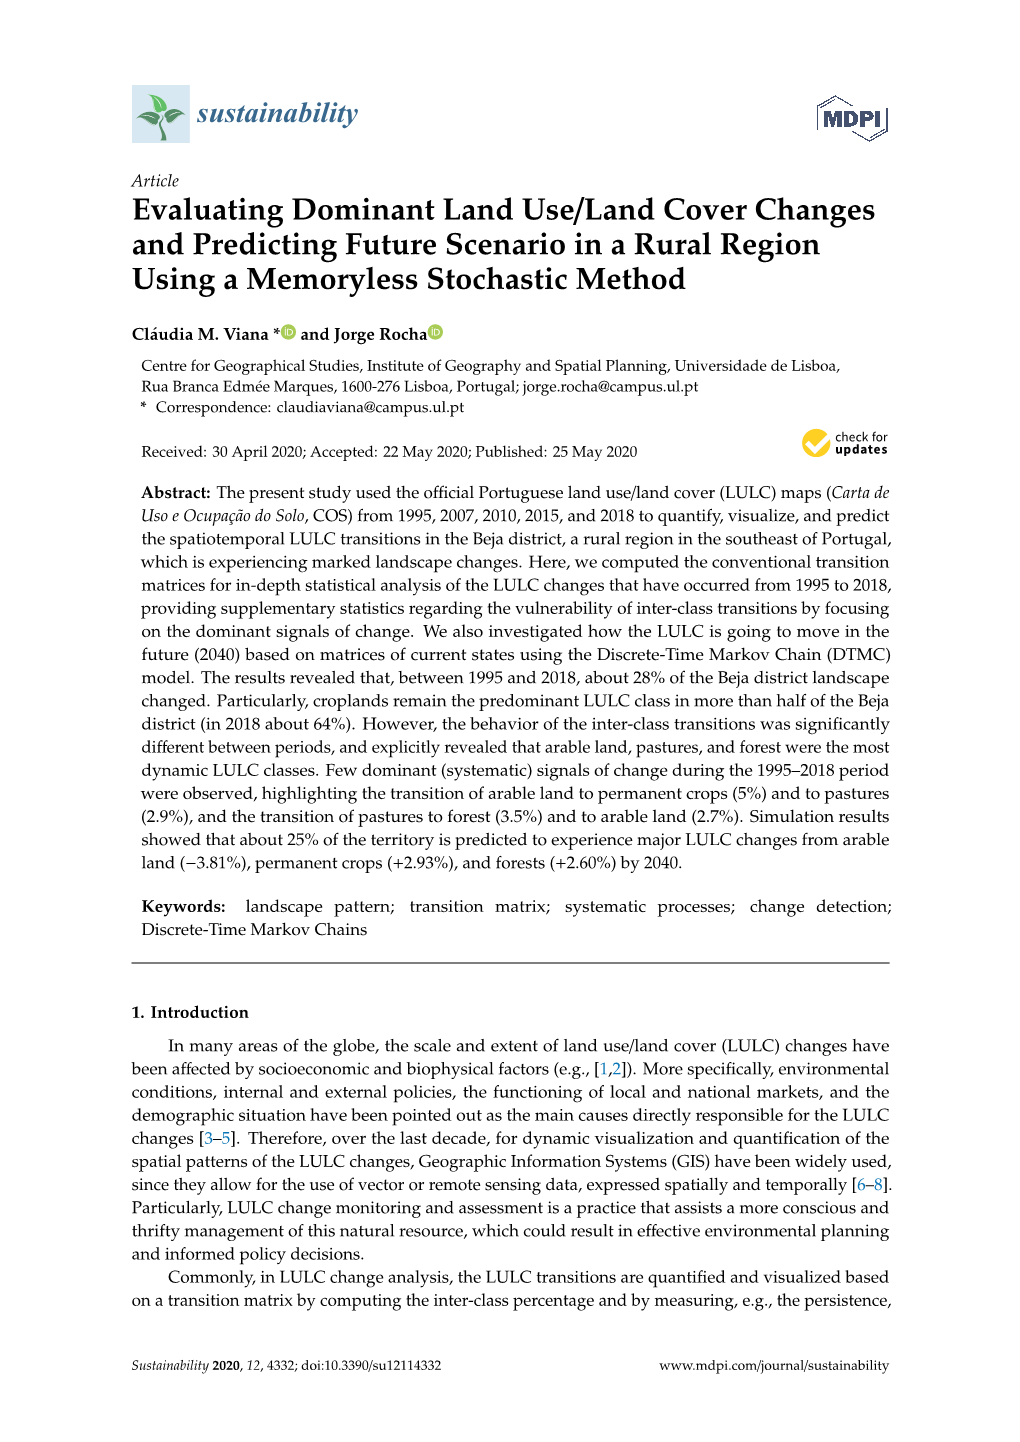 Evaluating Dominant Land Use/Land Cover Changes and Predicting Future Scenario in a Rural Region Using a Memoryless Stochastic Method